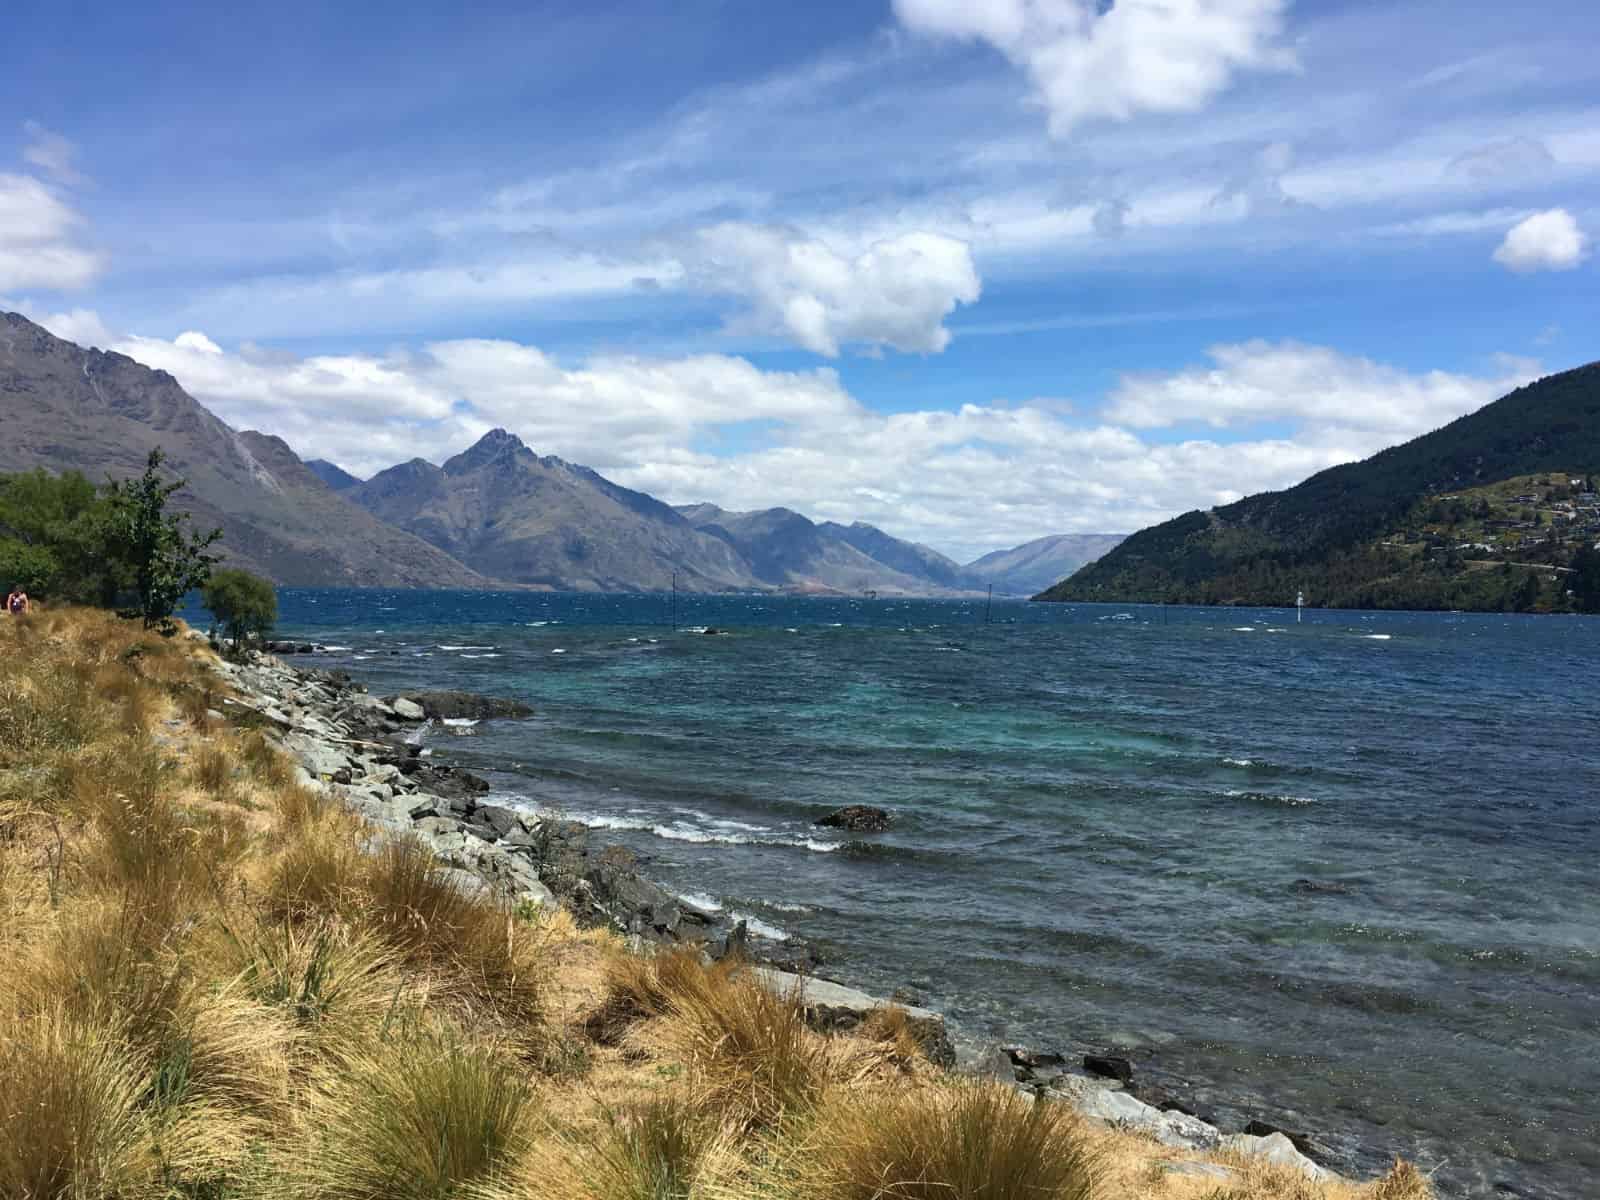 Enjoy the scenic beauty of Glenorchy during your 5 days in Queenstown